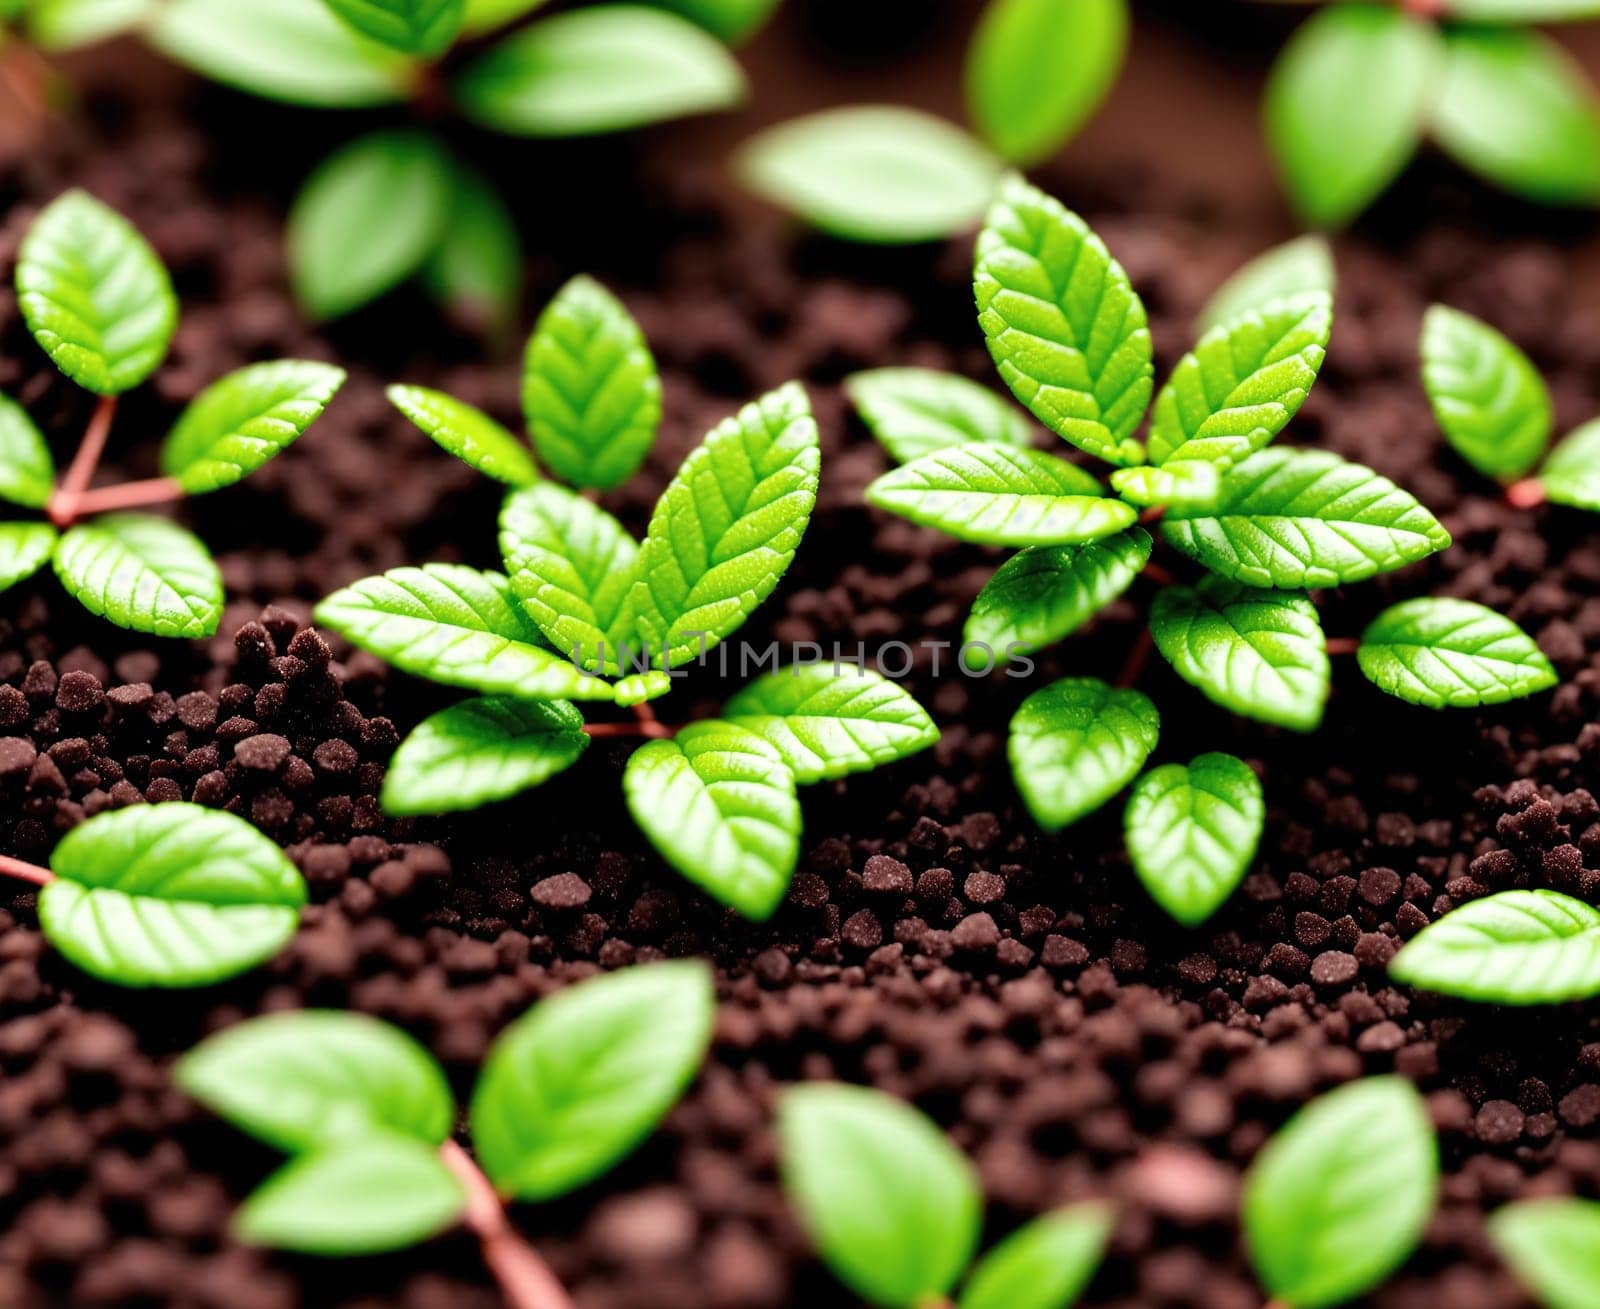 The image shows a group of small green plants growing in a dirt field.